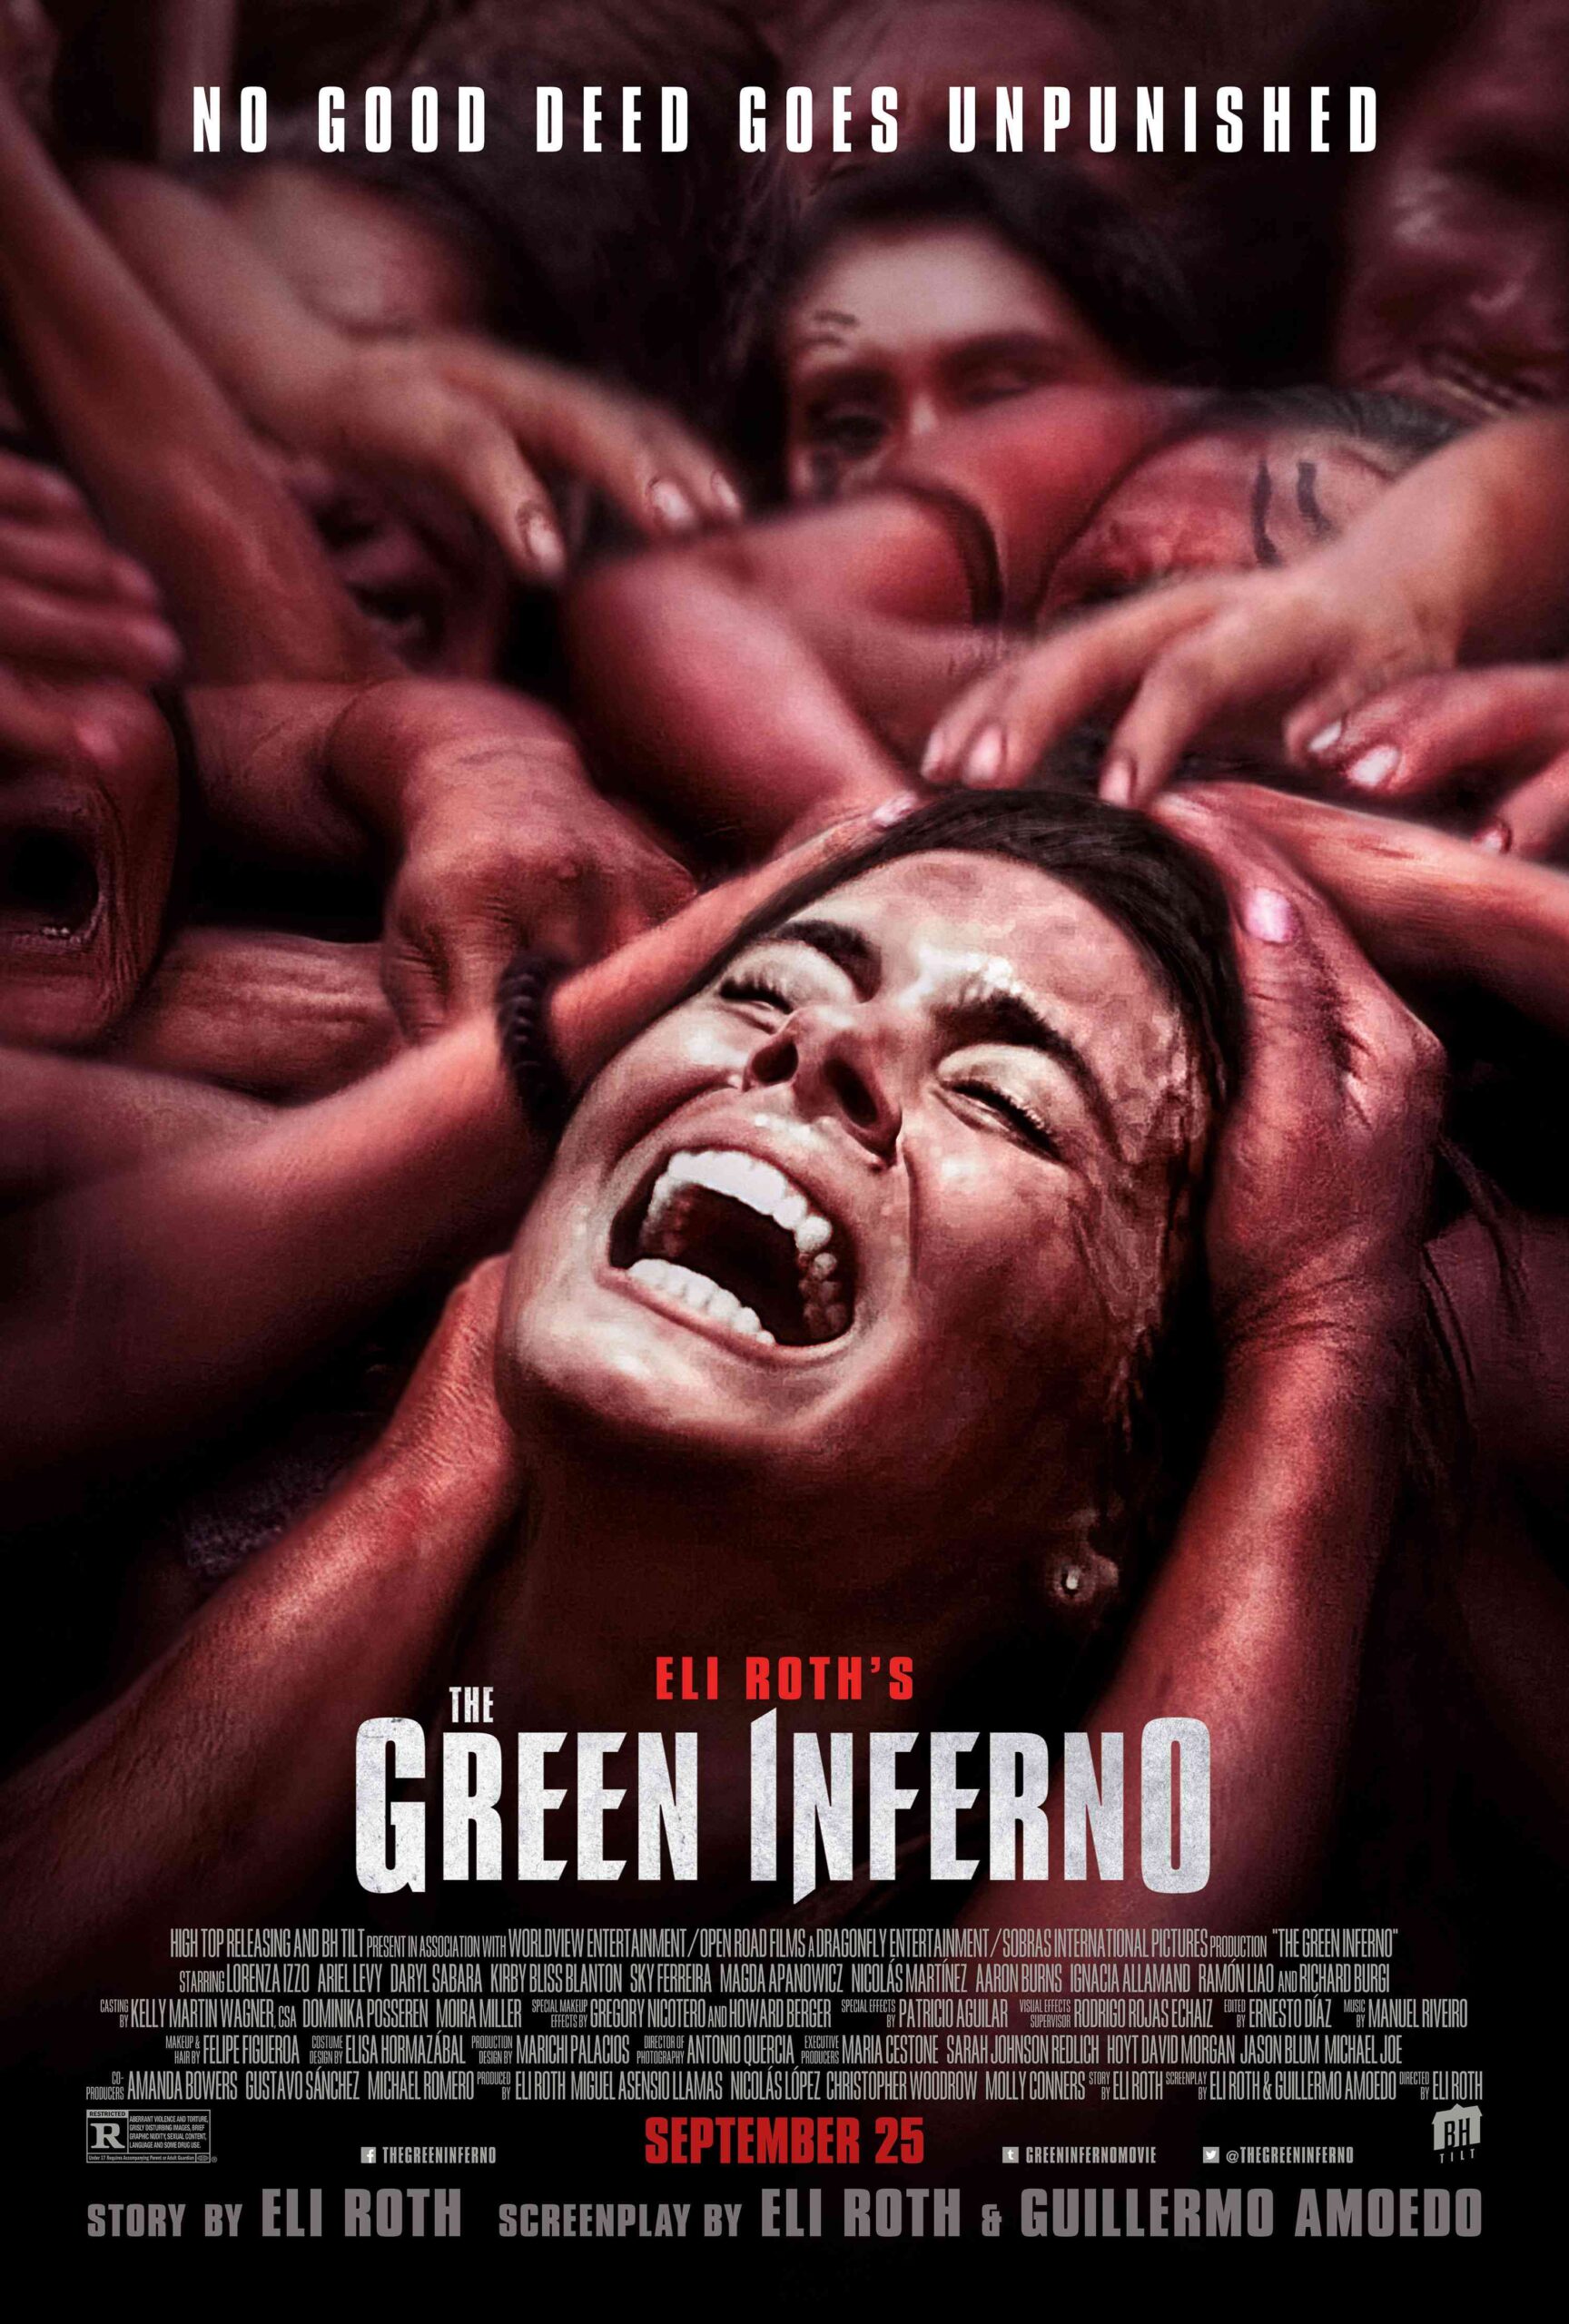 FULL MOVIE: The Green Inferno (2013)